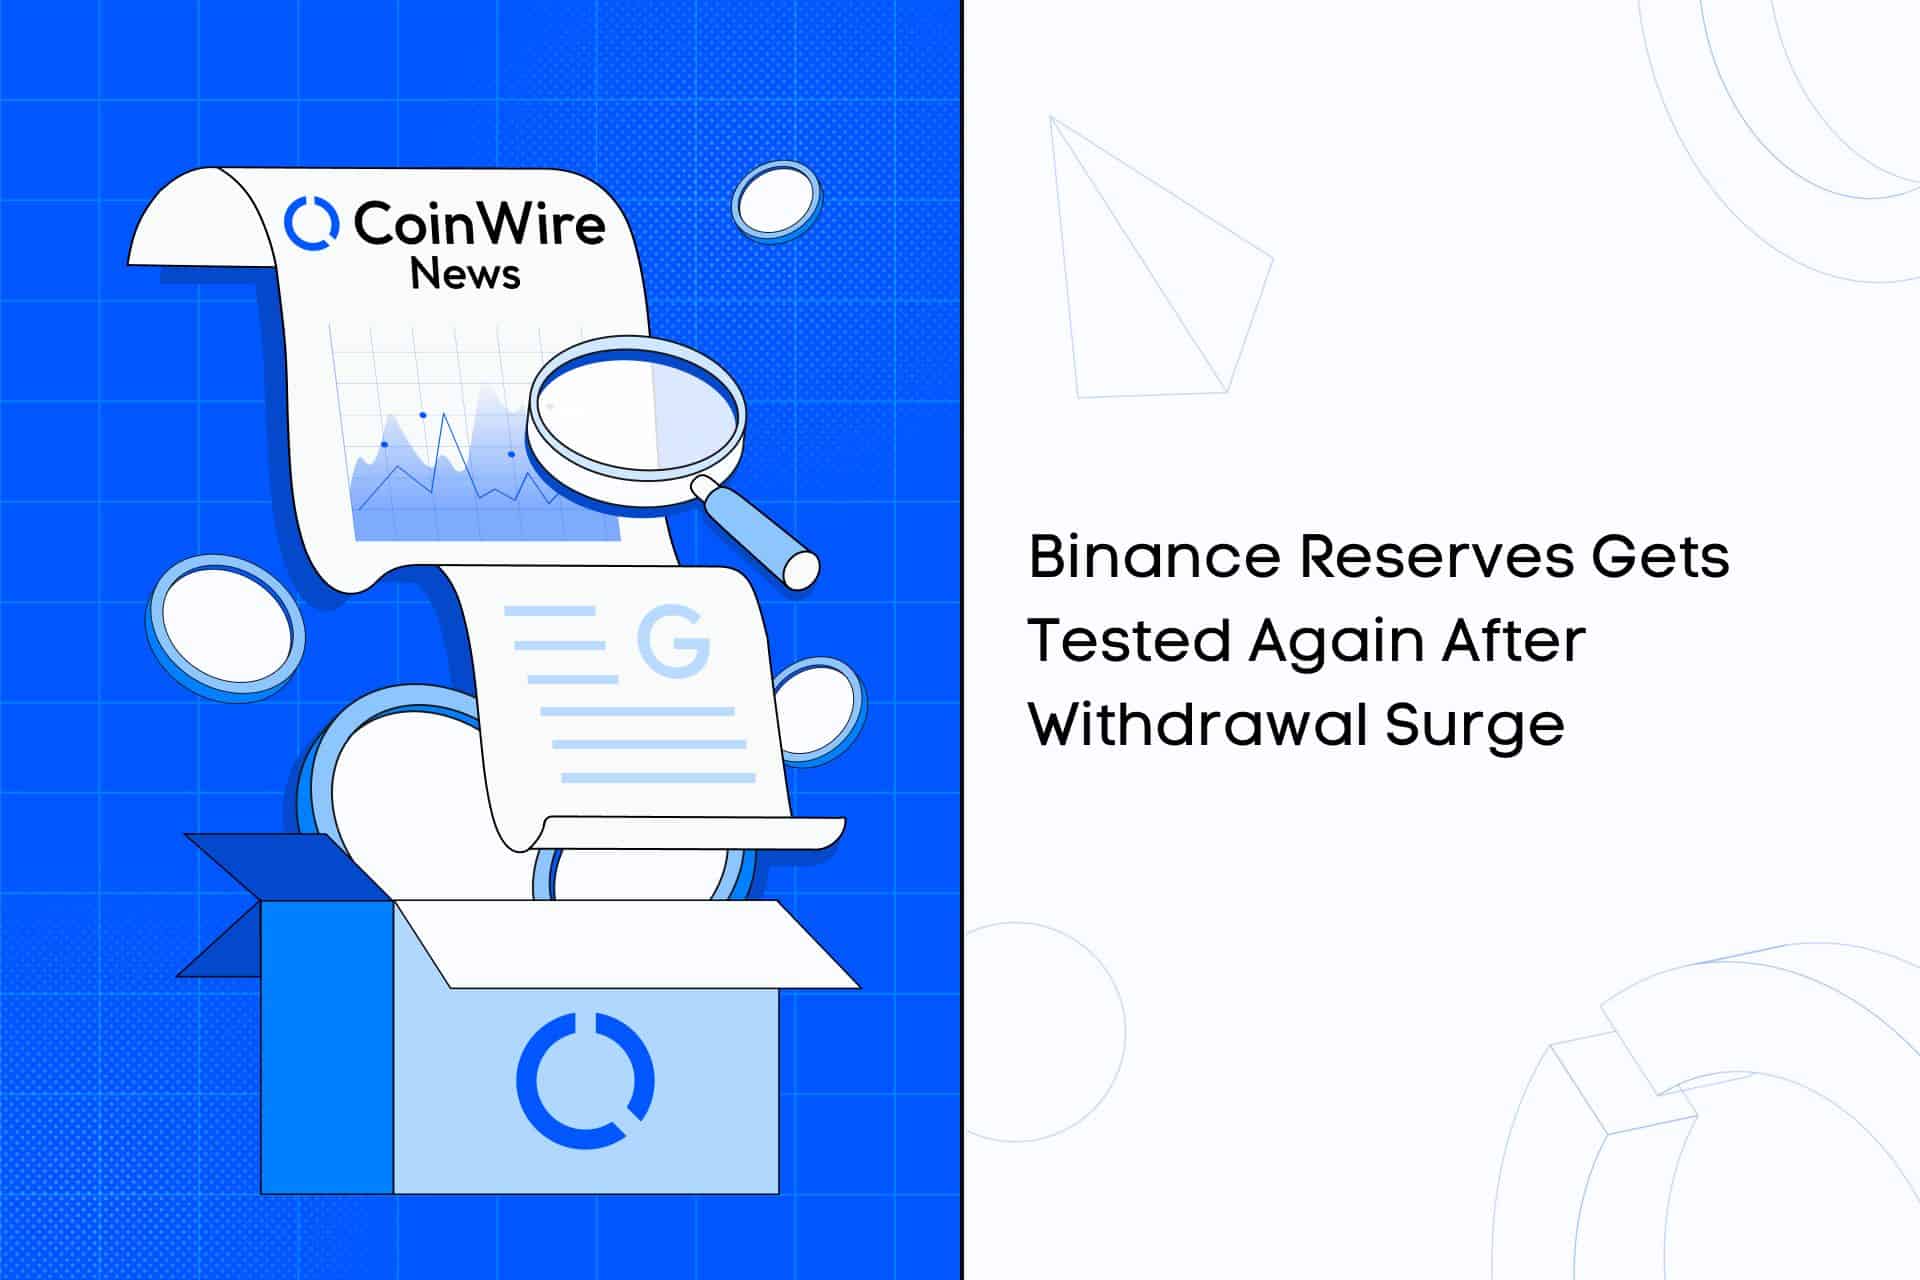 Binance Reserves Gets Tested Again After Withdrawal Surge